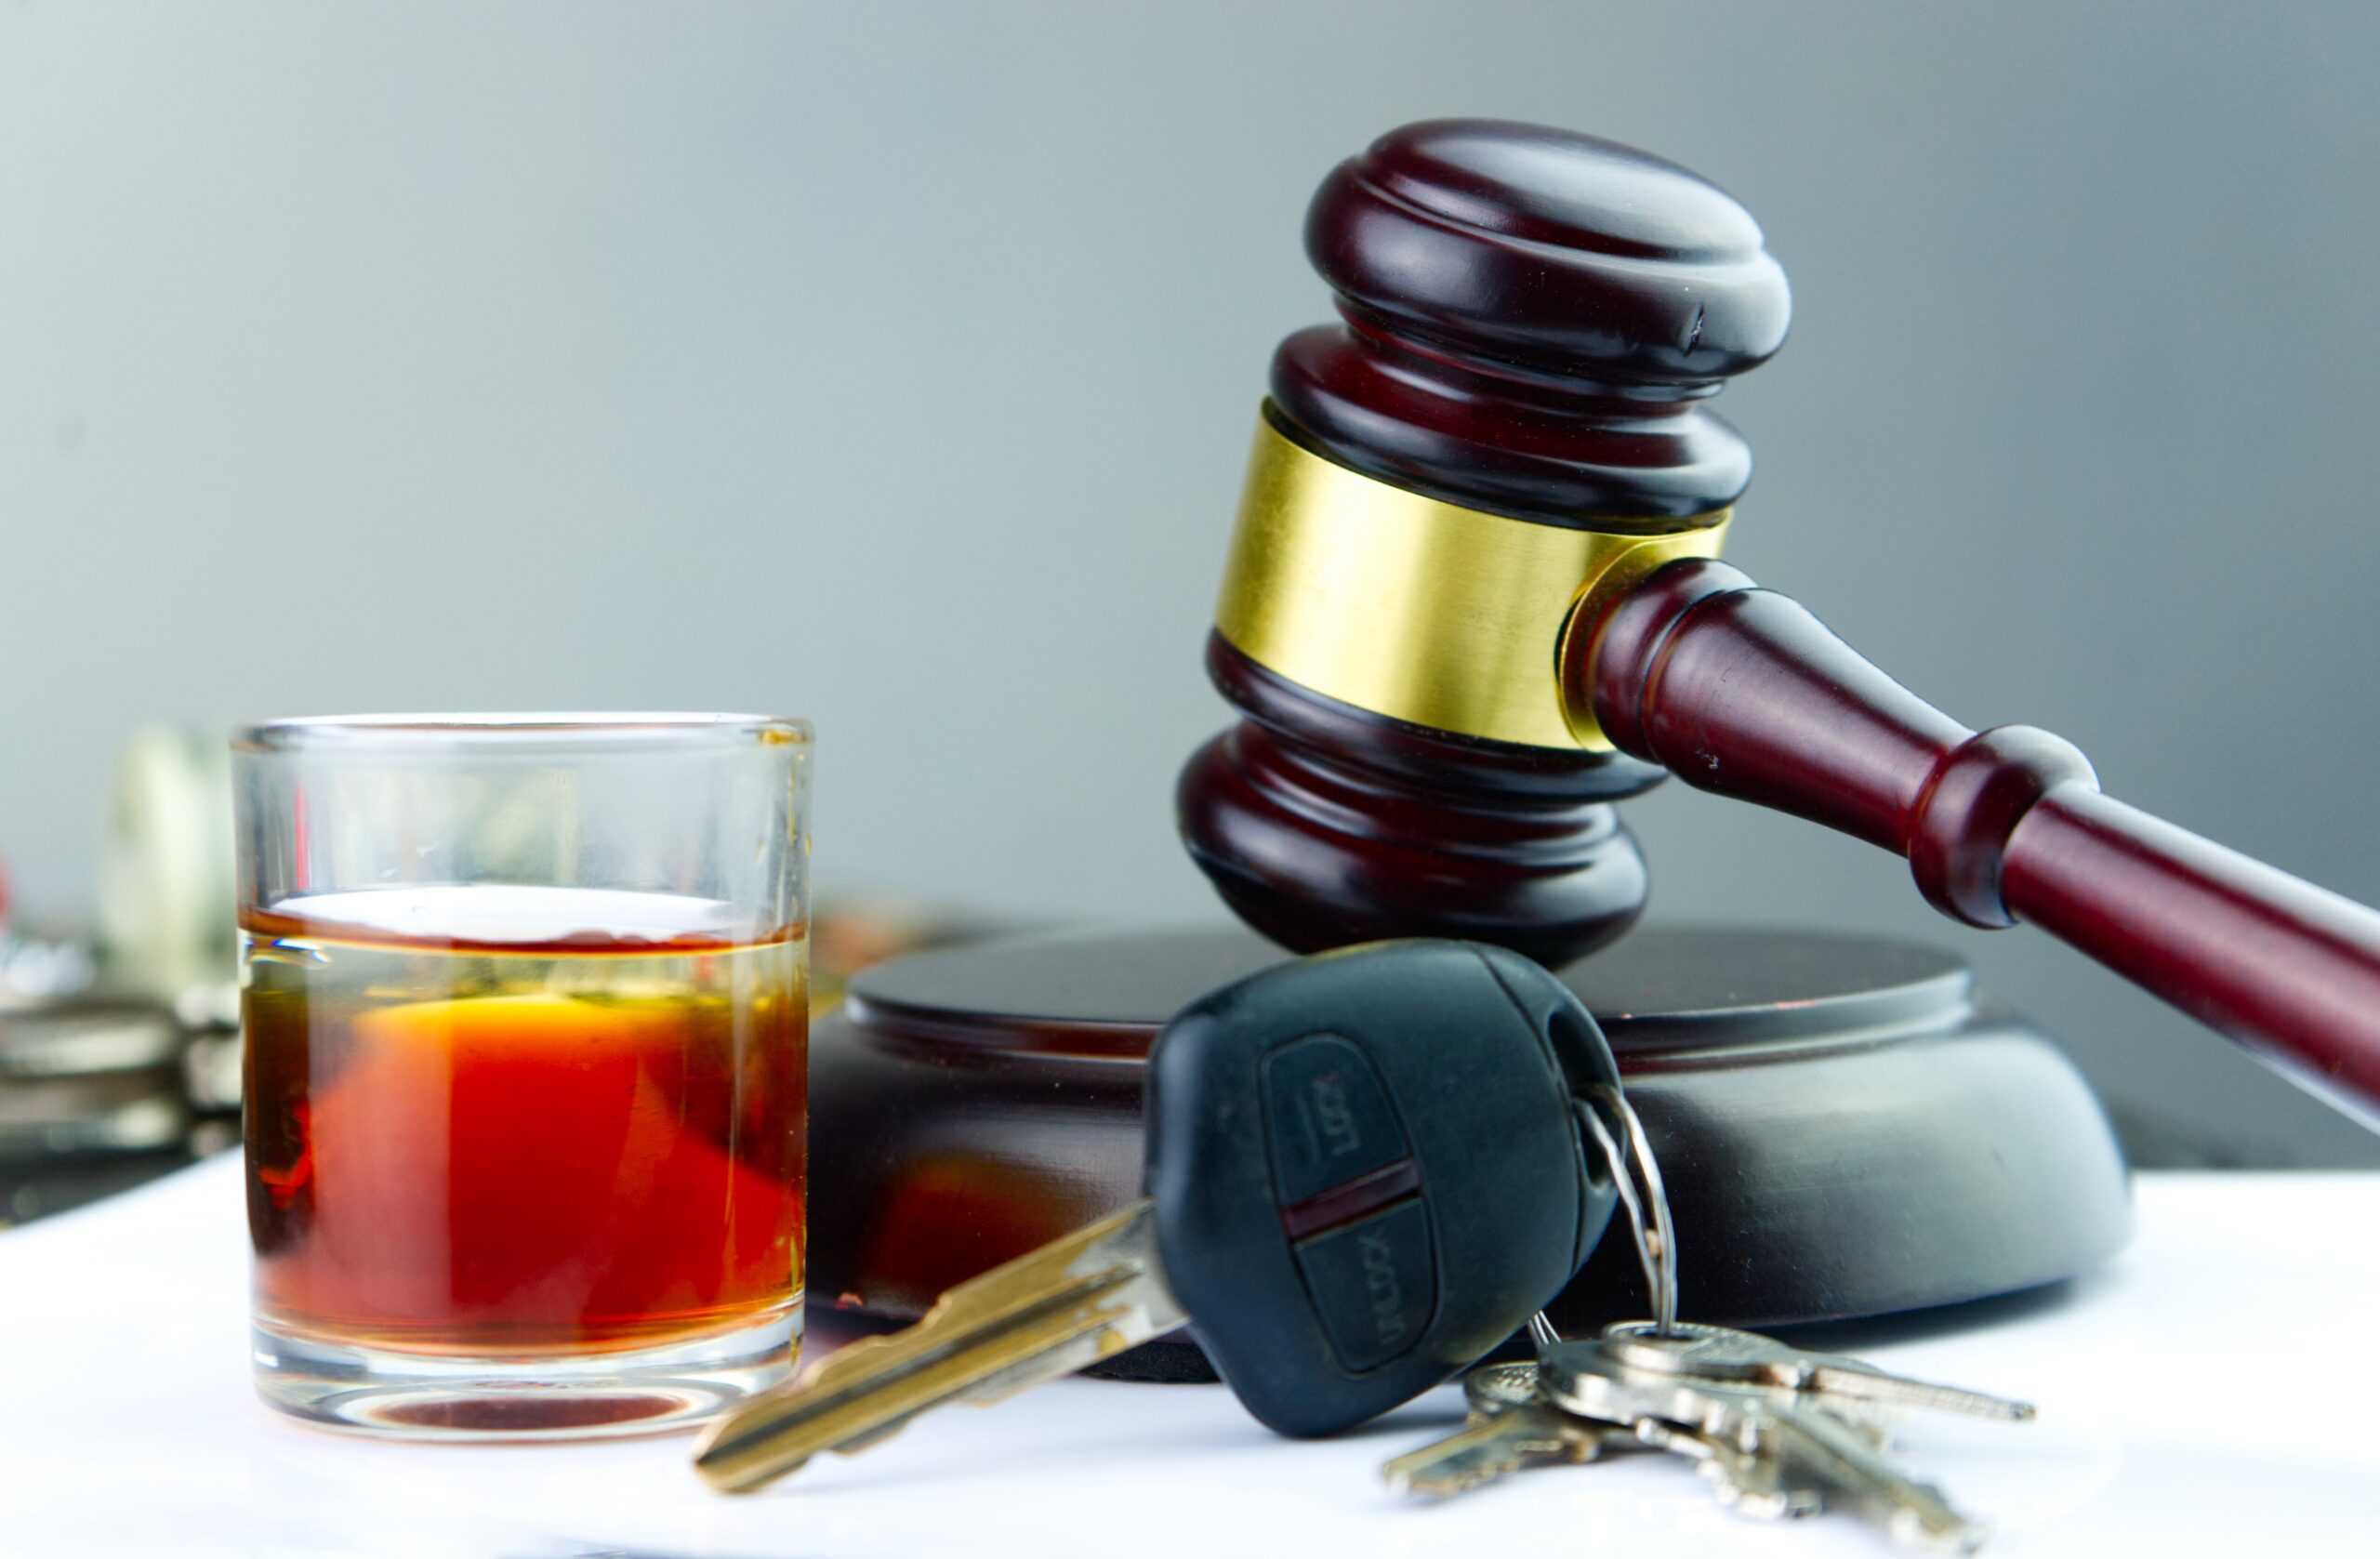 A set of keys and a glass filled with an alcoholic beverage sit in front of a justice gavel on a table. Contact our experienced DUI lawyers in Oklahoma for a strong legal representative